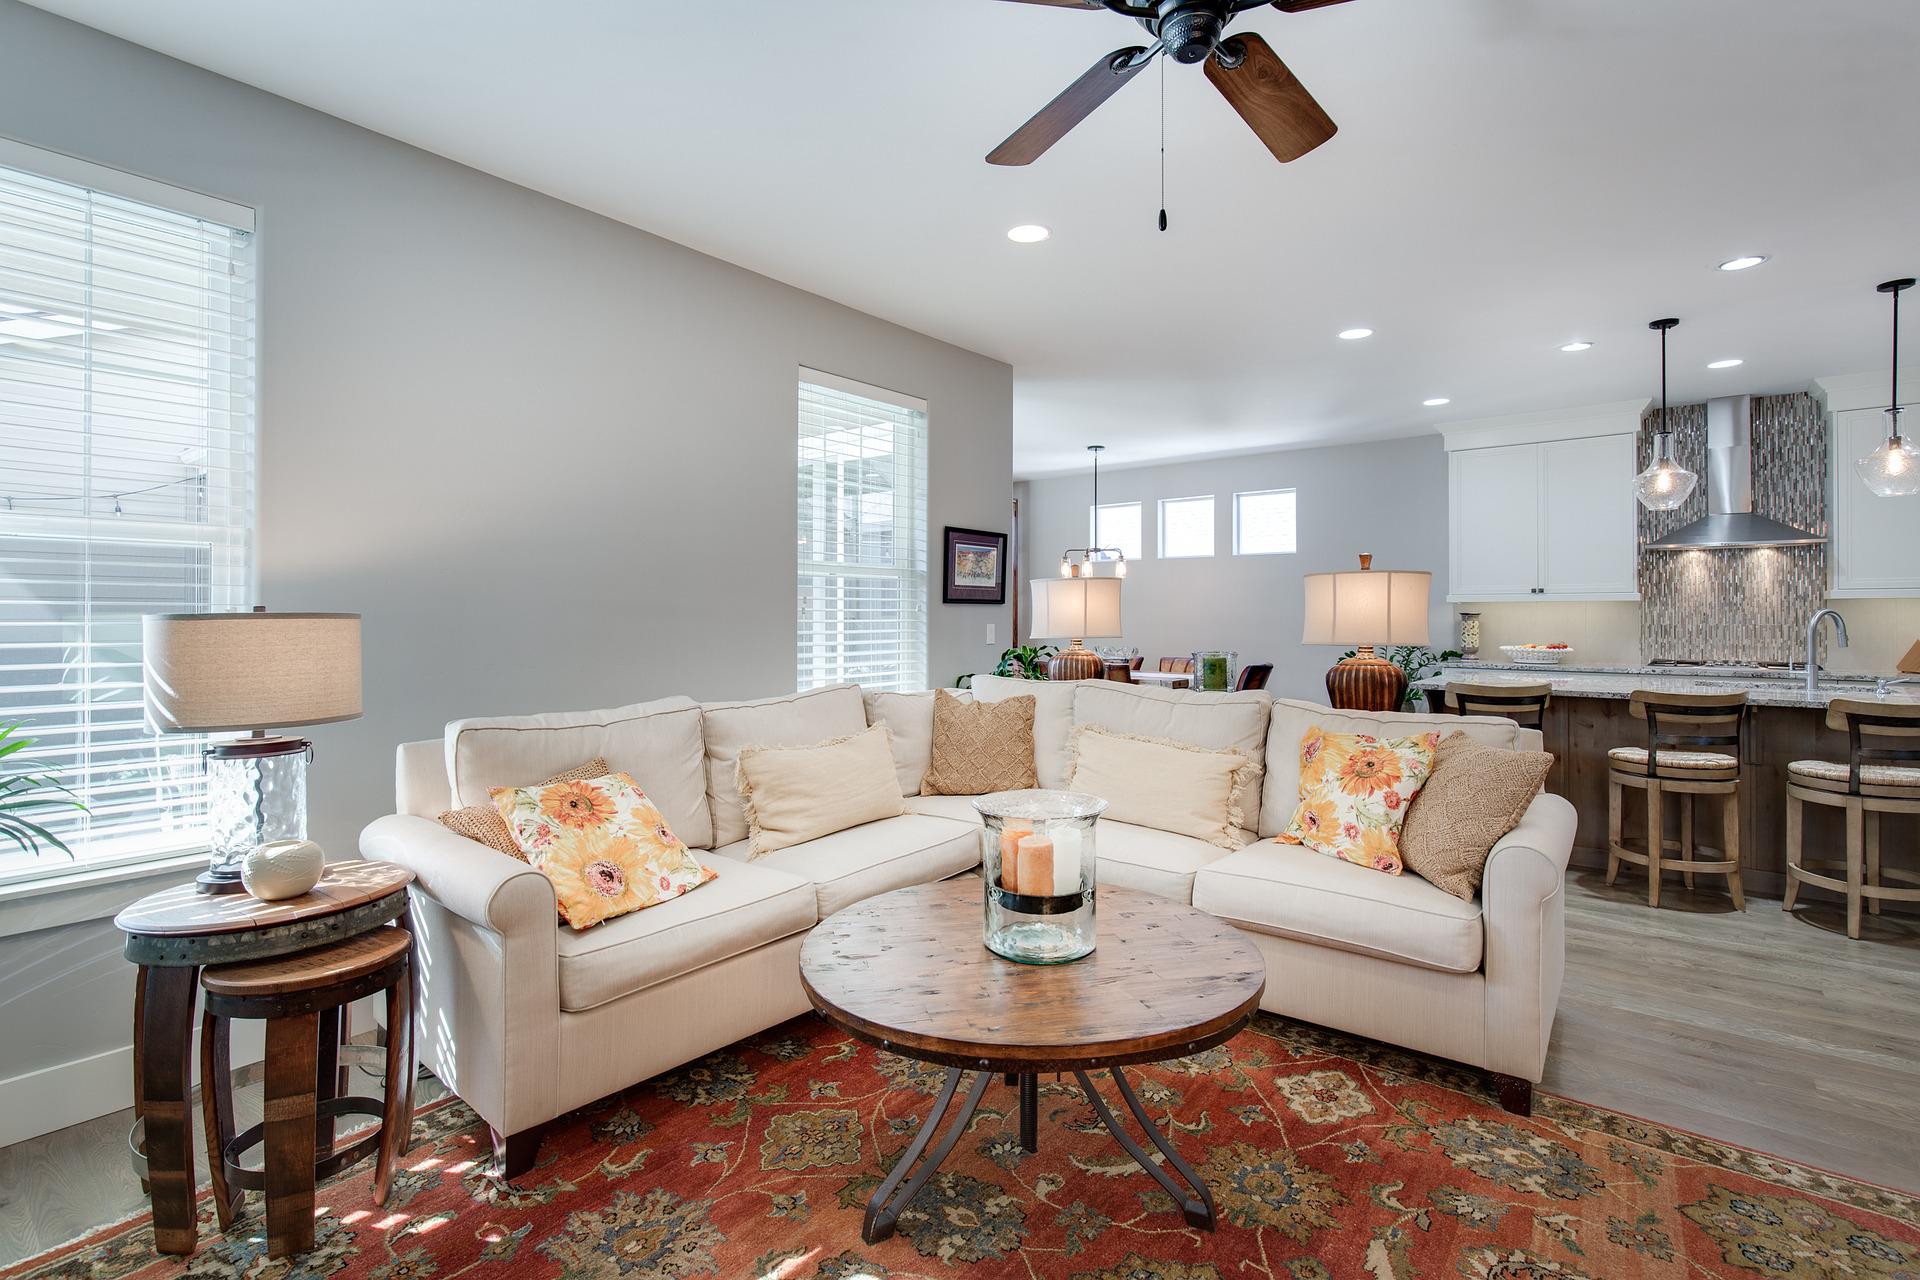 Home Staging: Light it Up Right